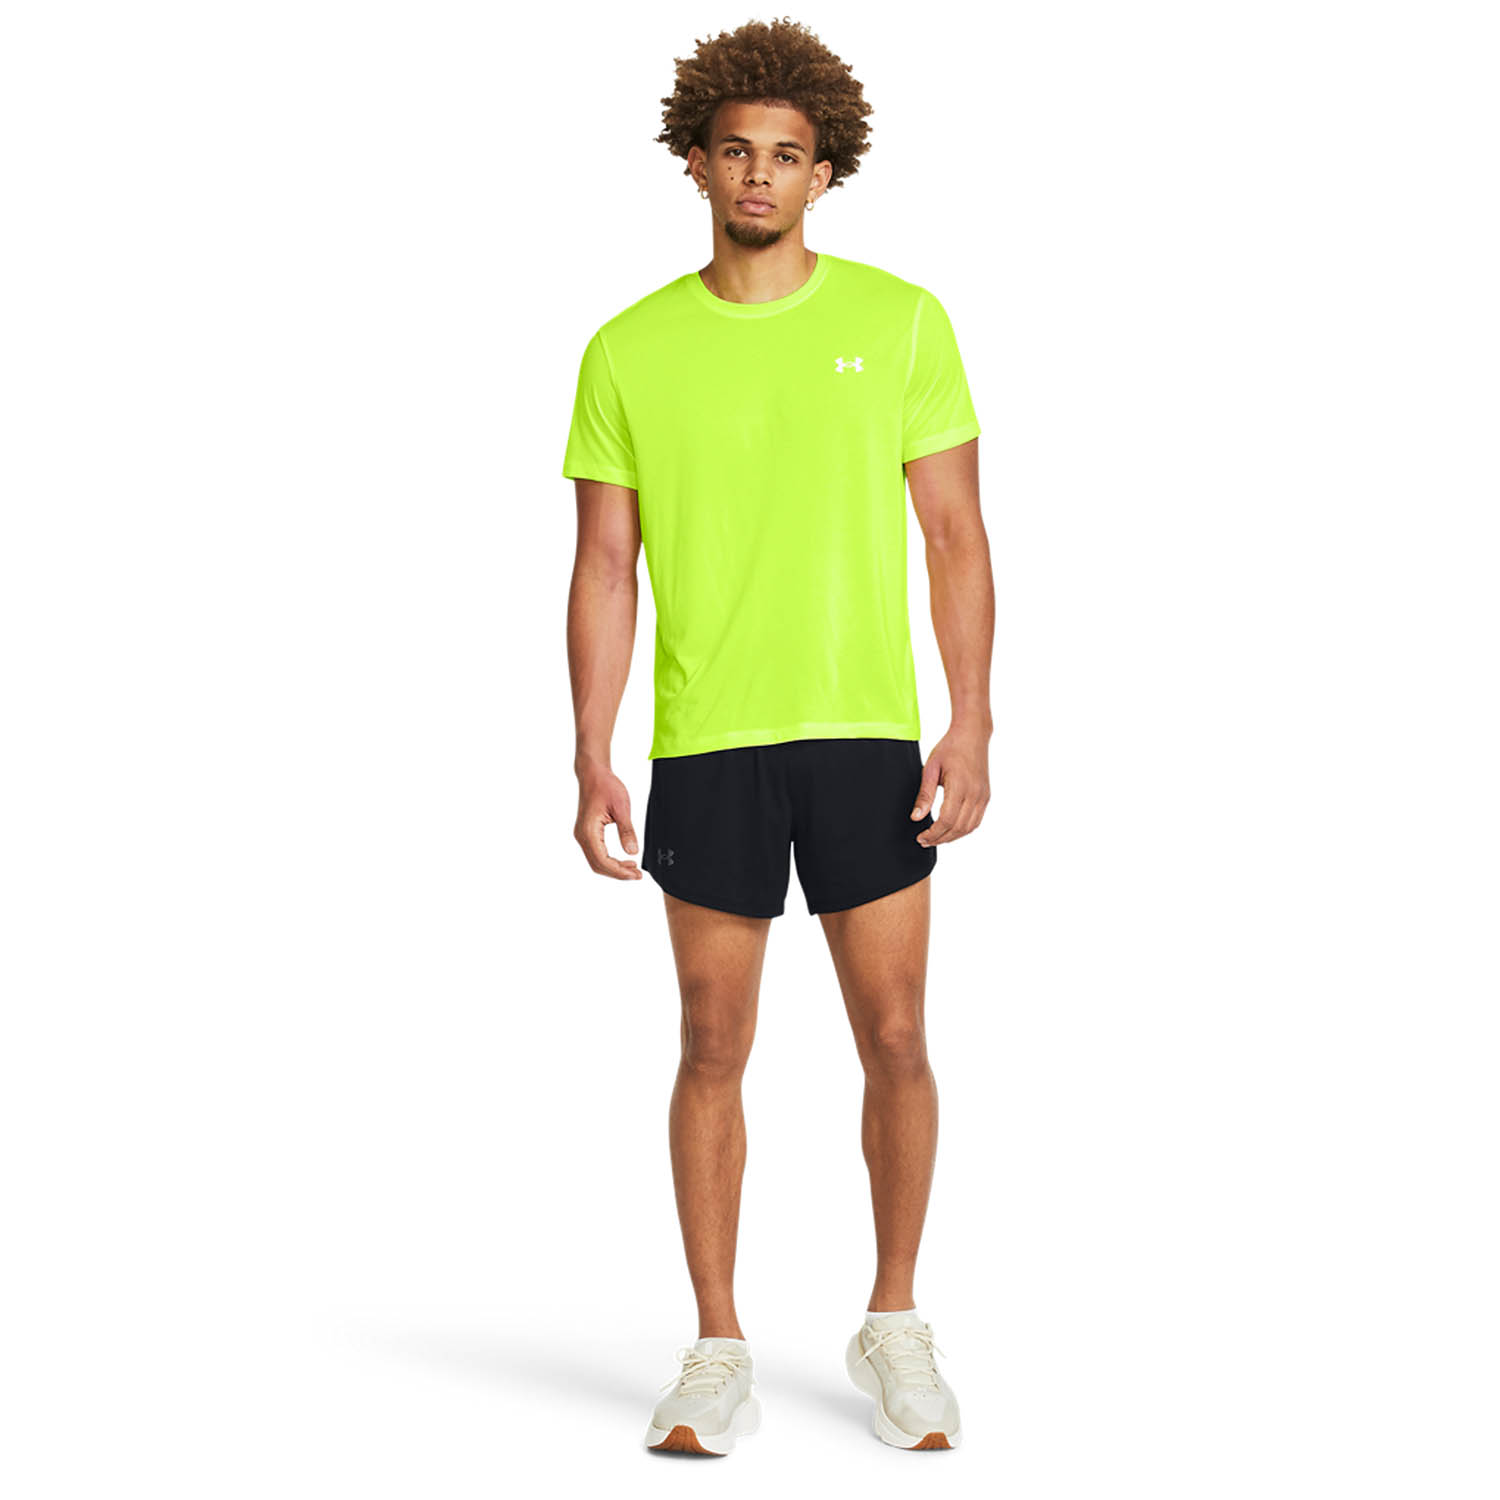 Under Armour Launch Elite 5in Shorts - Black/Reflective